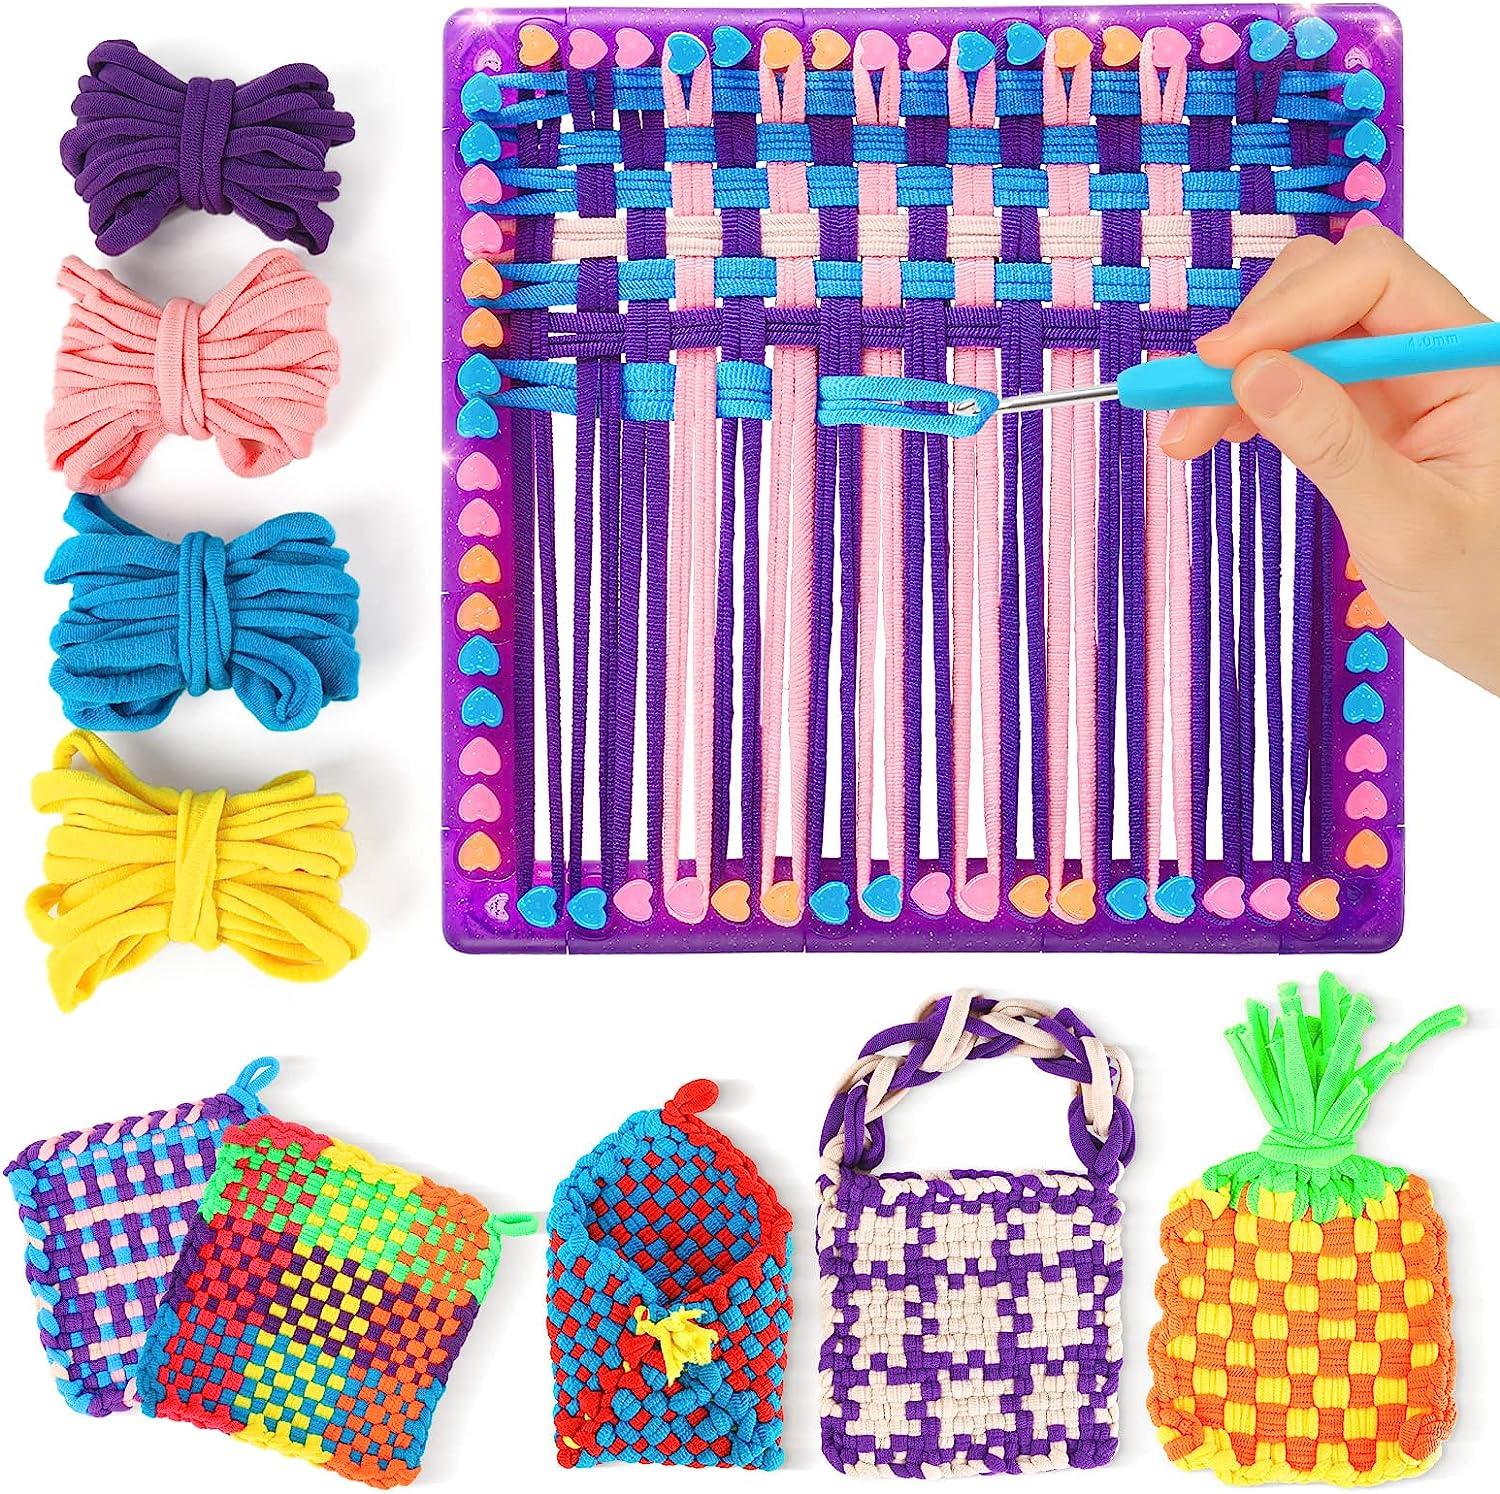 DDAI Weaving Loom Kit Crafts for Kids and Adults - Potholder Loops Toys for  Girls and Boys Ages 6 7 8 9 10 11 12 - Beginners Knitting Loom Set Holder  Weaving Kits and Gifts - Metal Crochet Hooks